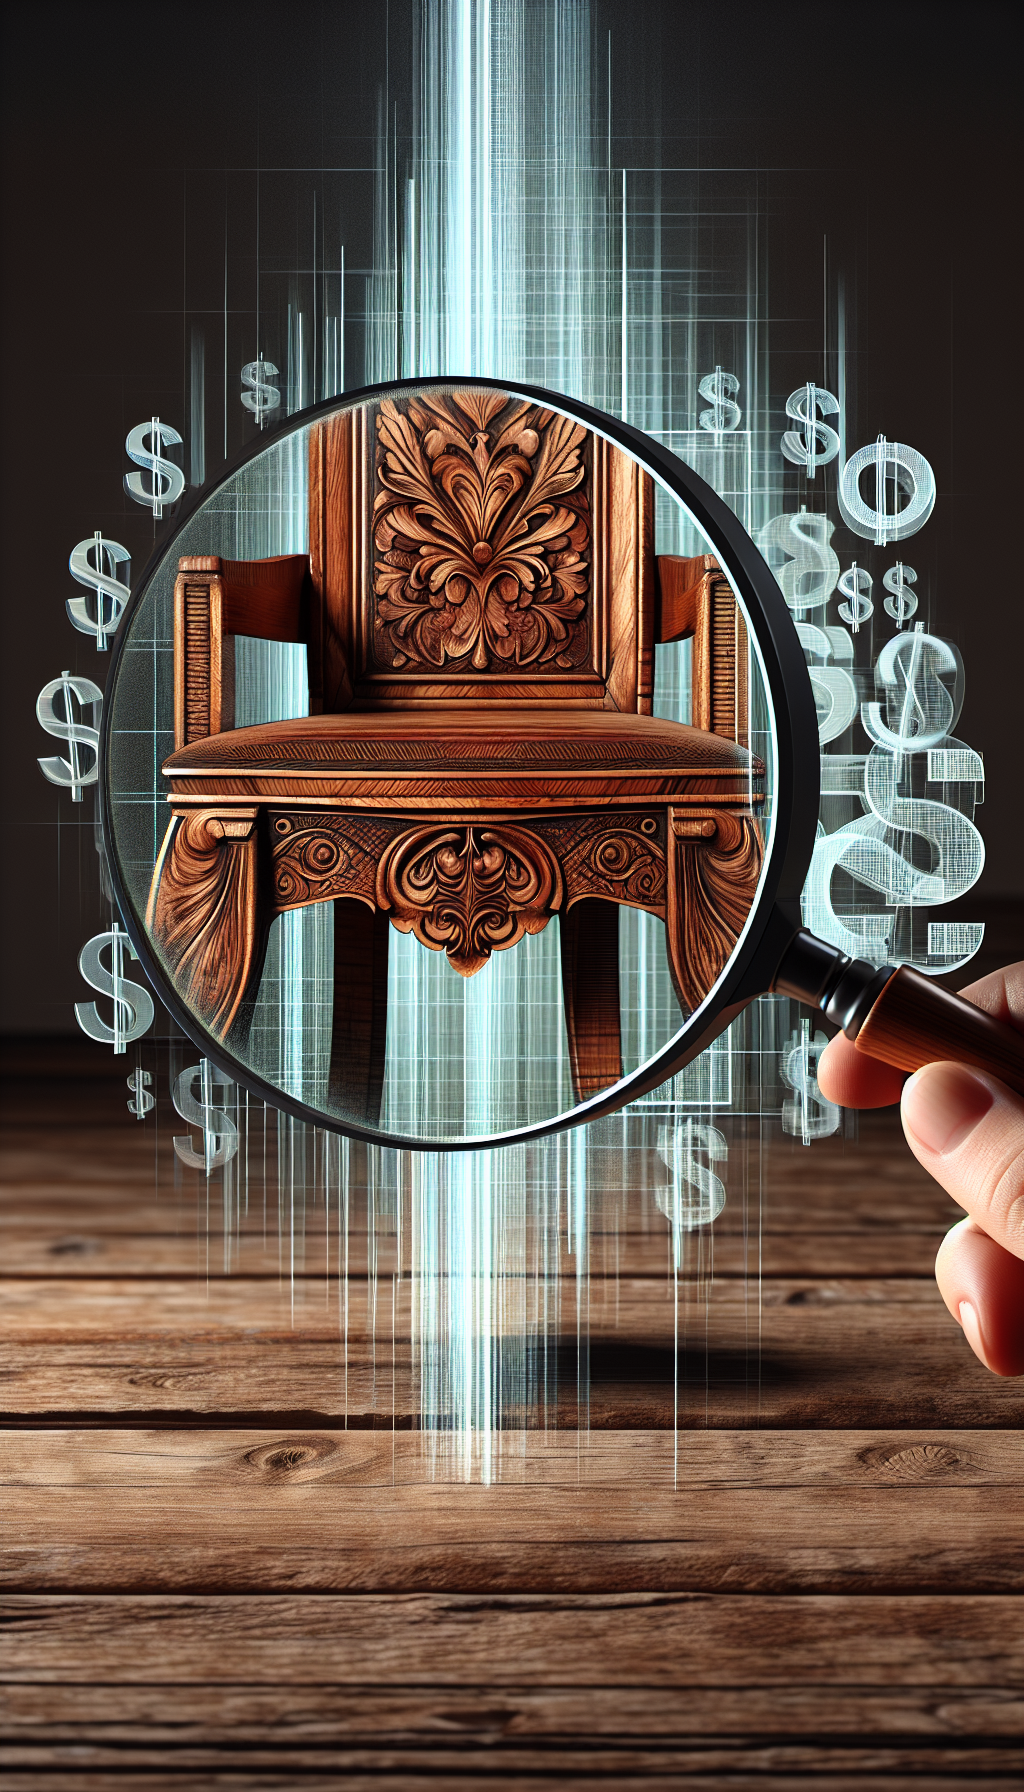 An illustration of a magnifying glass held over a splendid, richly-detailed wooden antique chair, with subtle glows signifying points of interest—wood grain patterns, ornate carvings, dovetail joints, and period-specific design elements. Beneath the magnified areas, translucent dollar figures gently rise, symbolizing the assessment and valuation of the piece's age and craftsmanship.